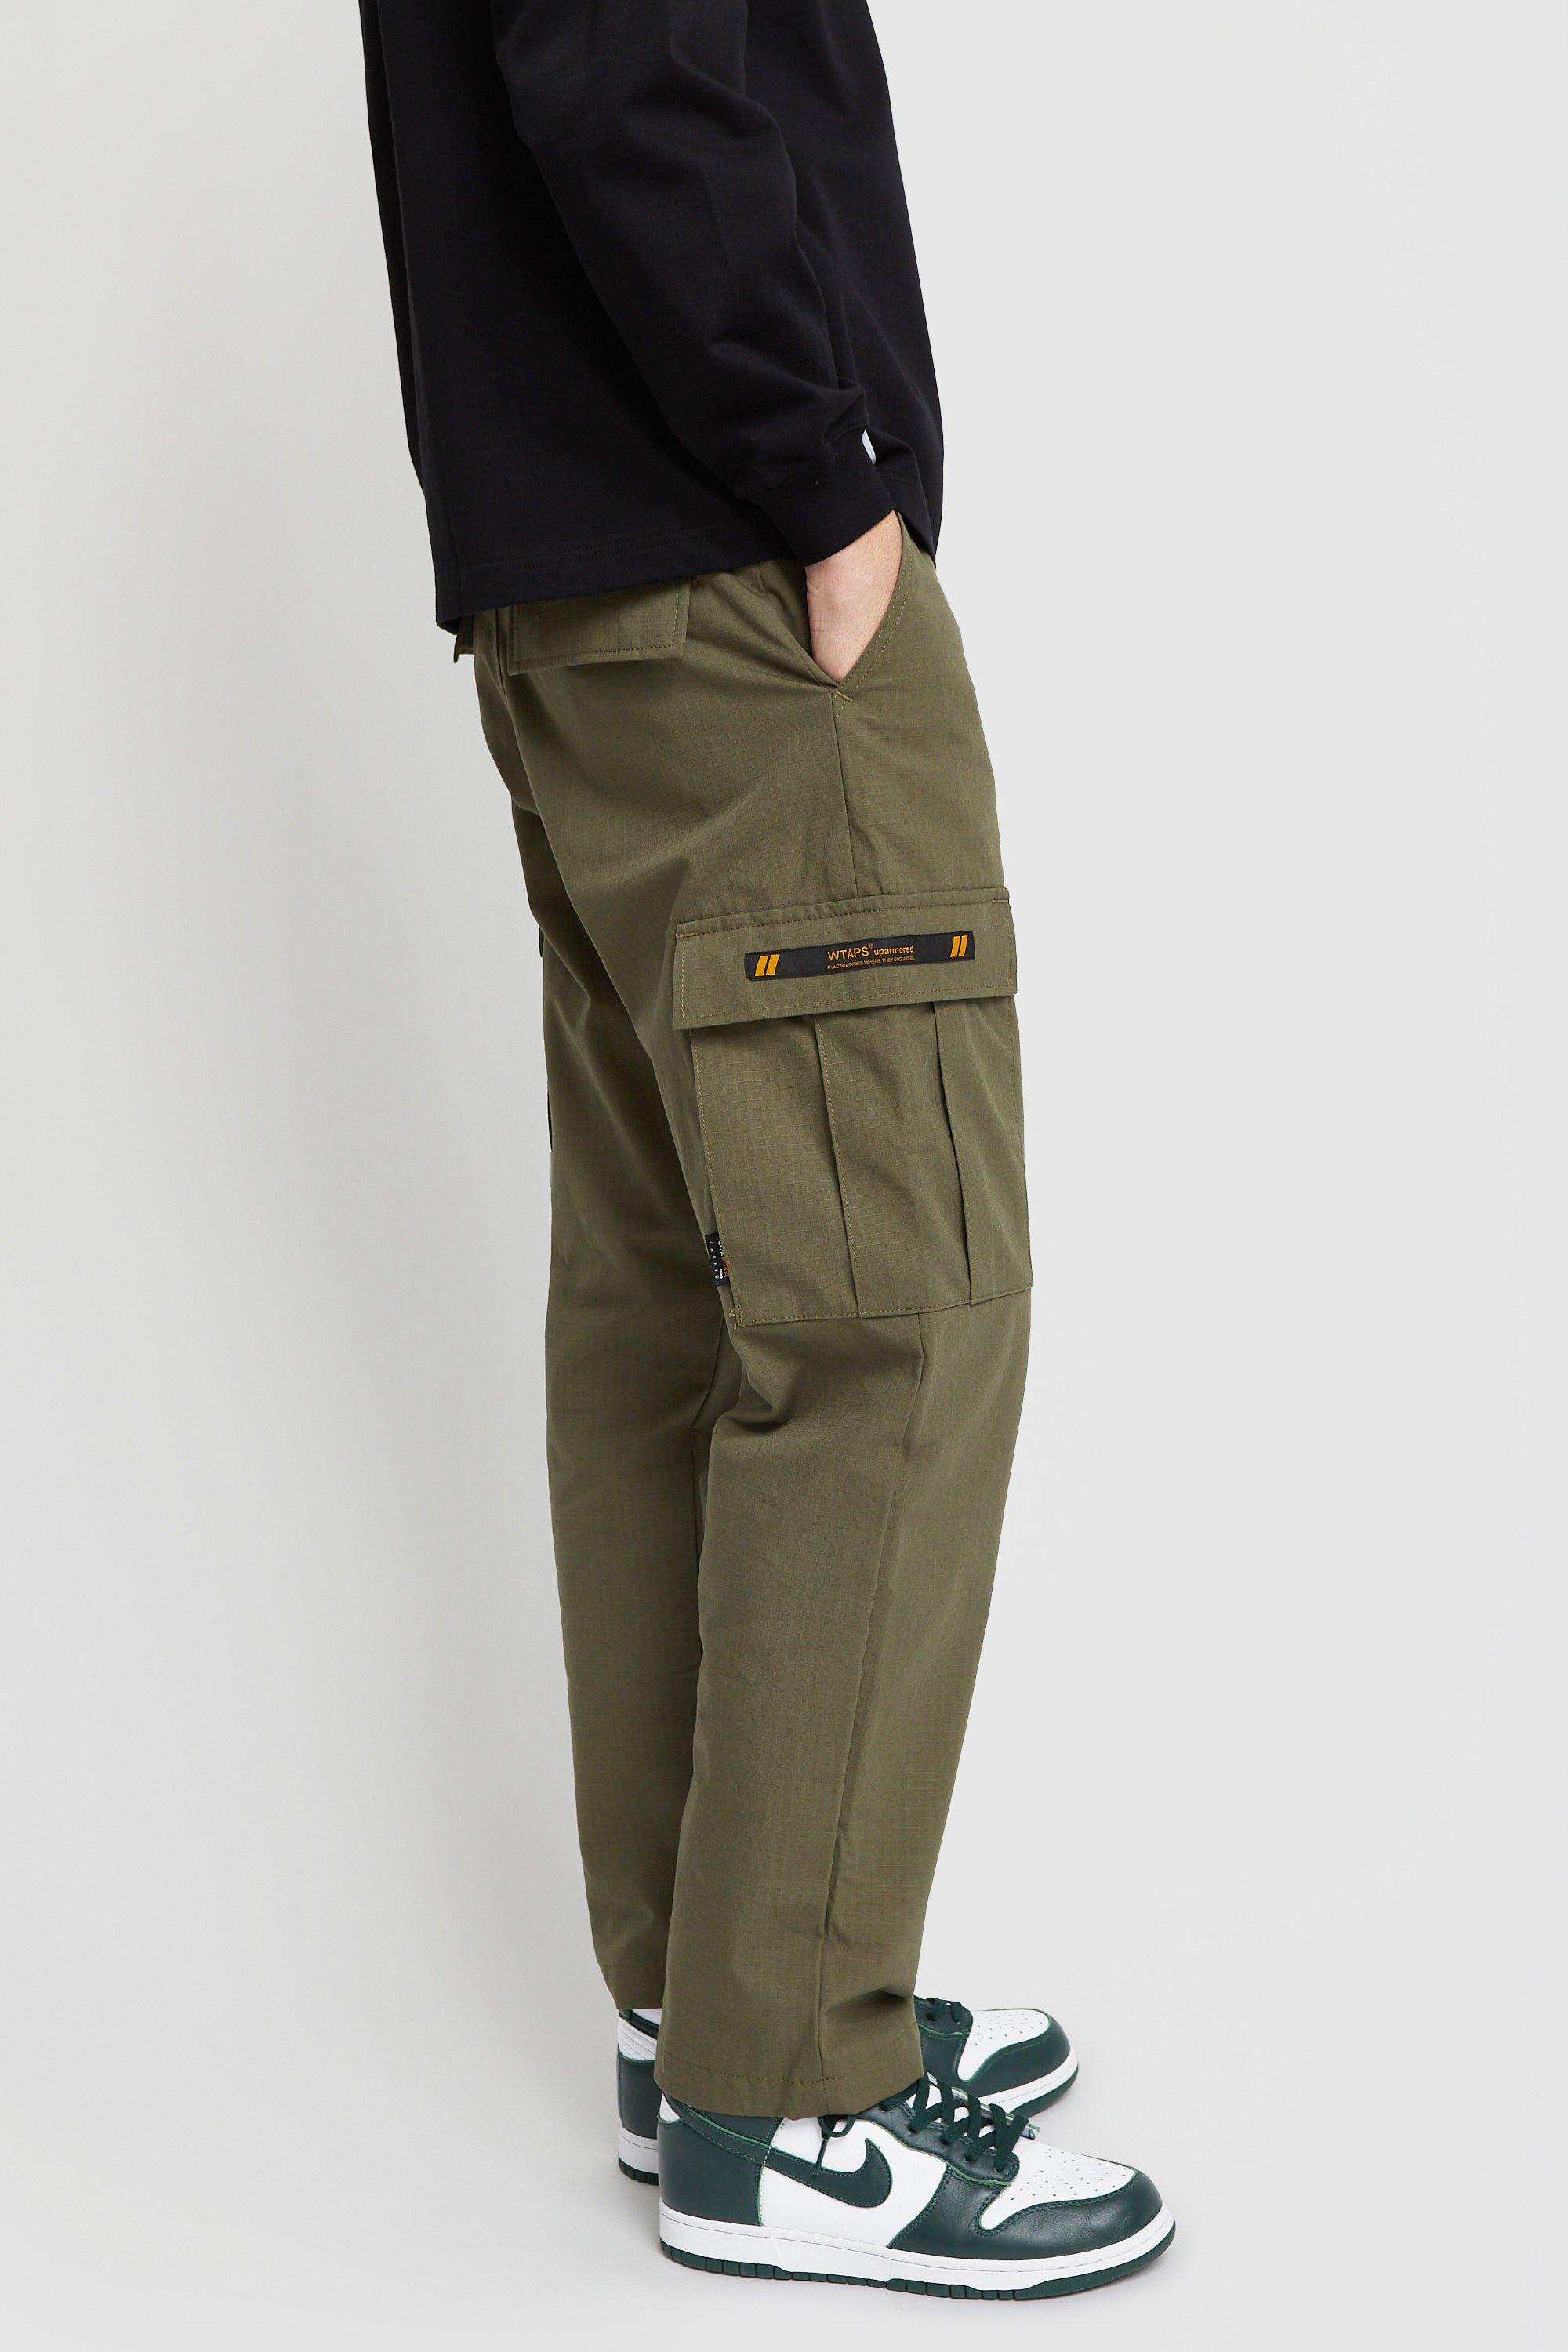 nikesbWTAPS JUNGLE COUNTRY TROUSERS